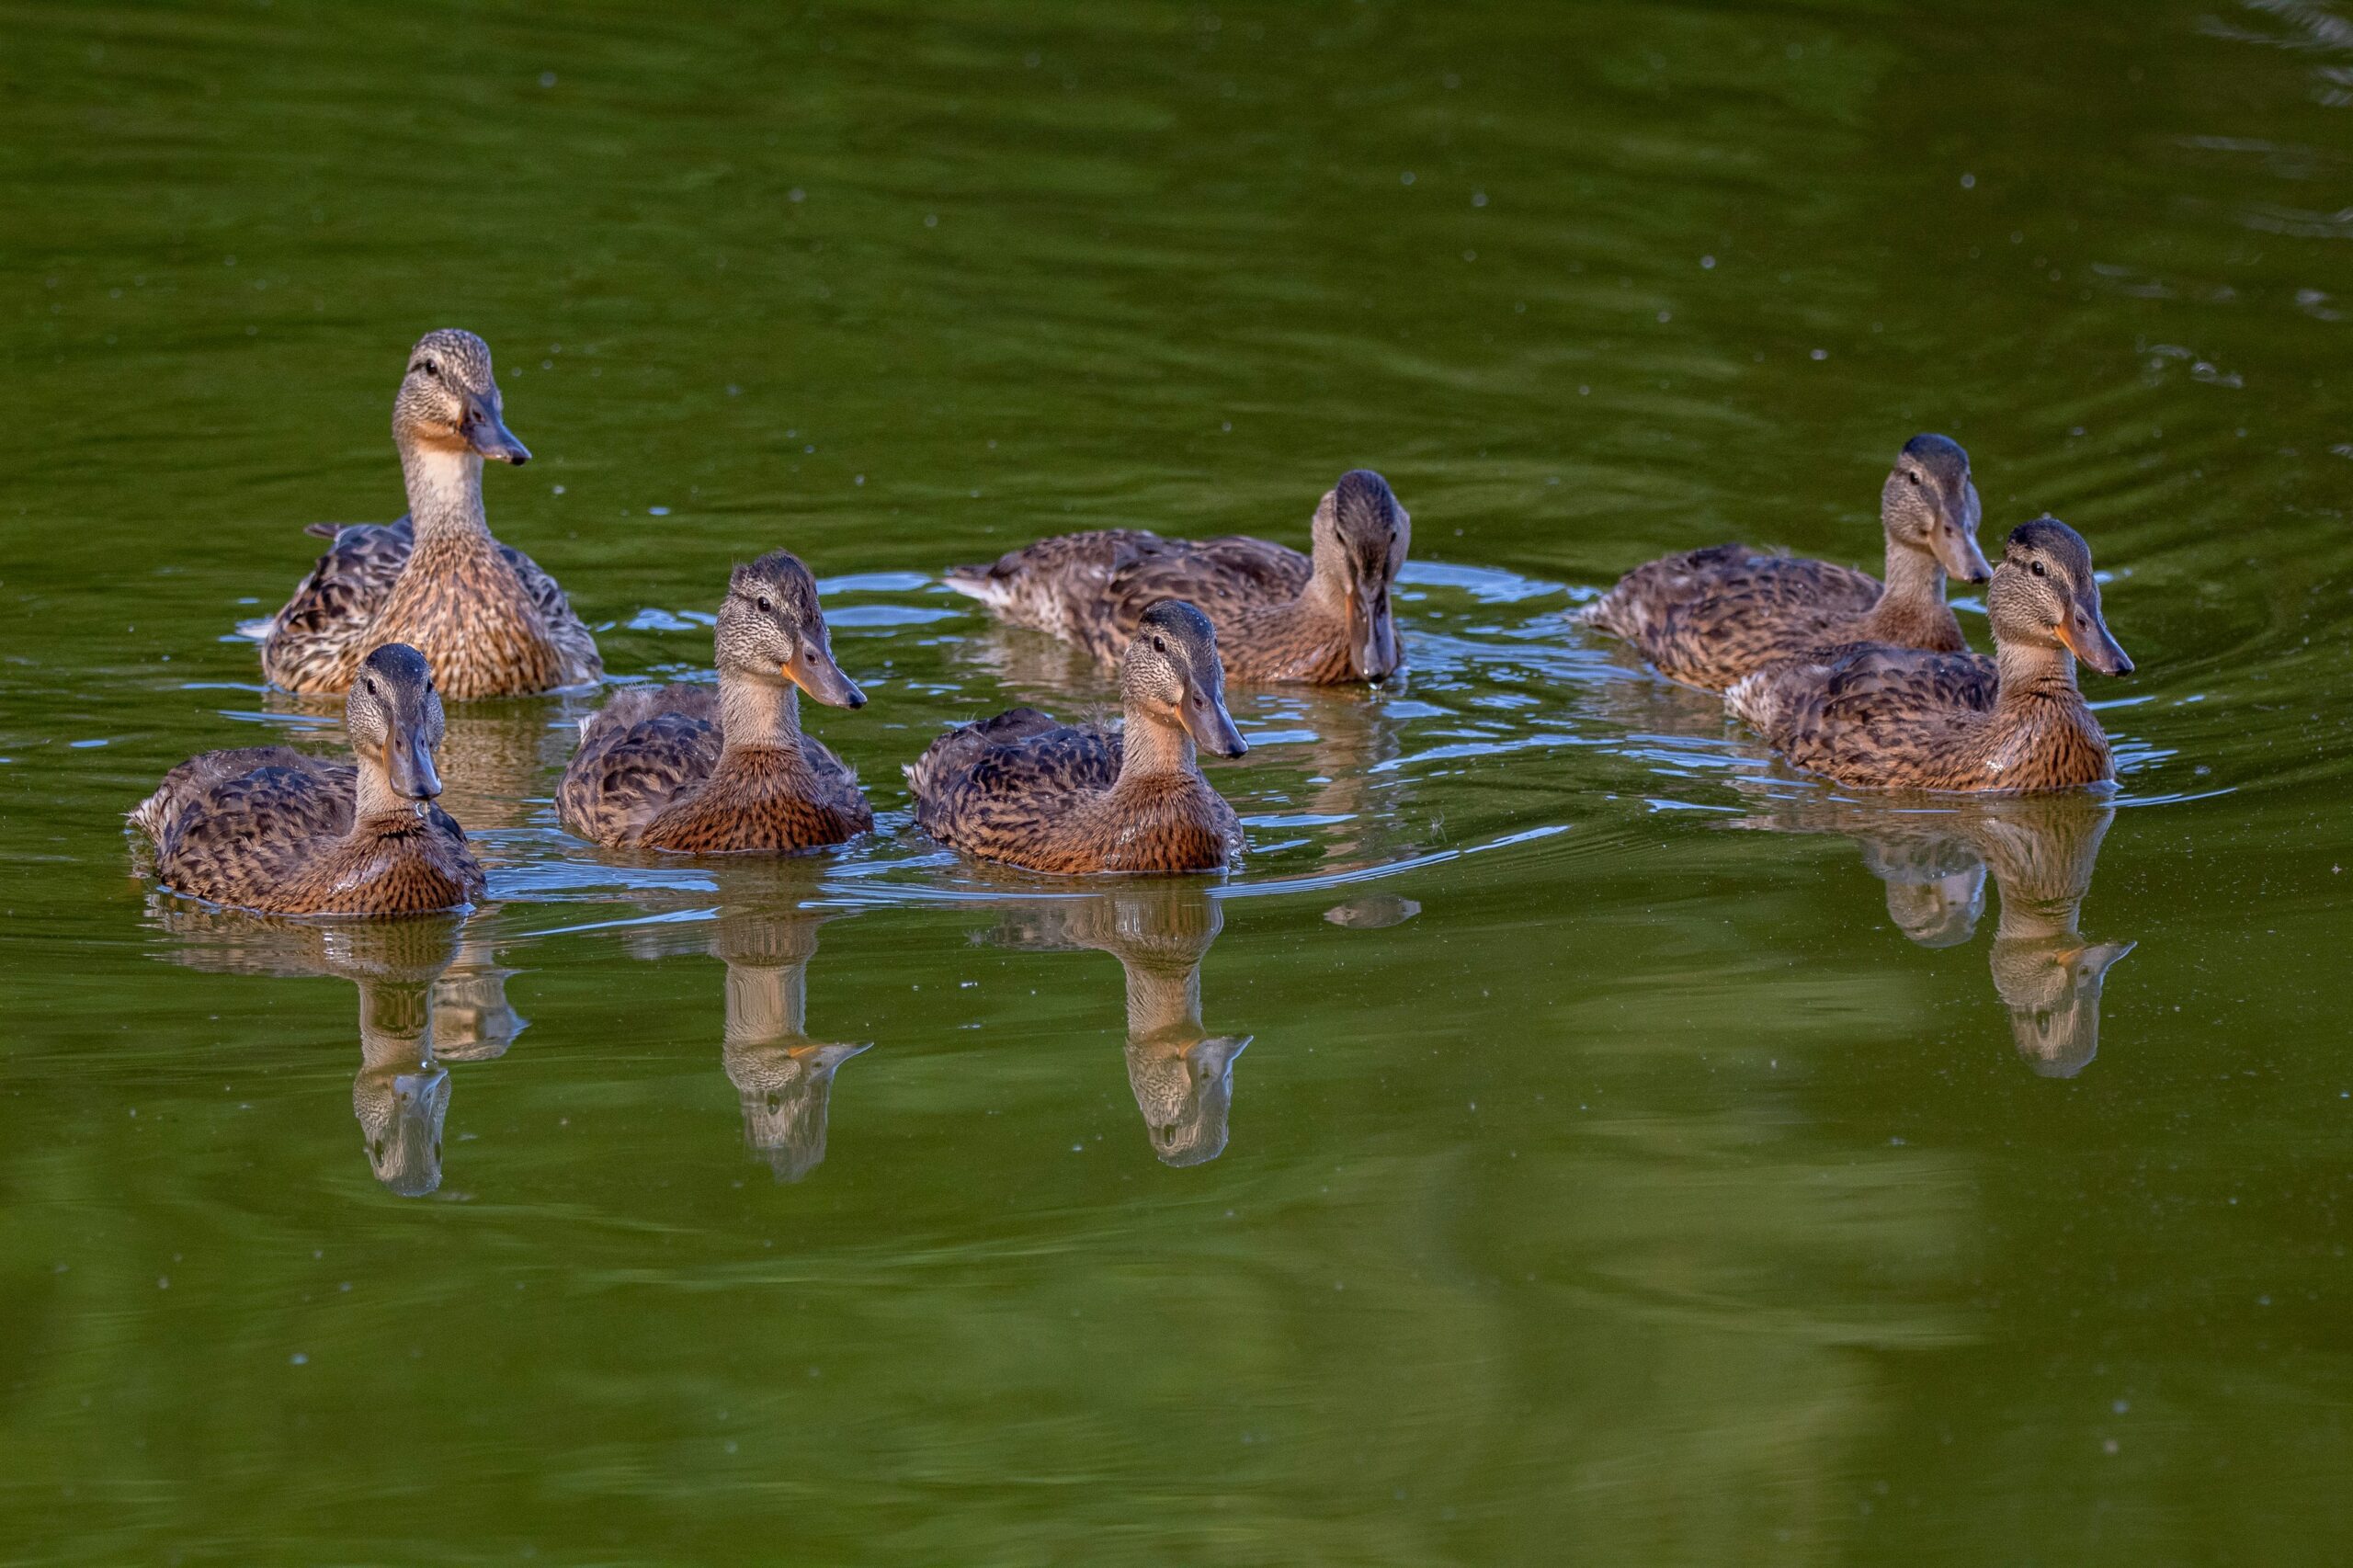 A family of ducks wading through a pond